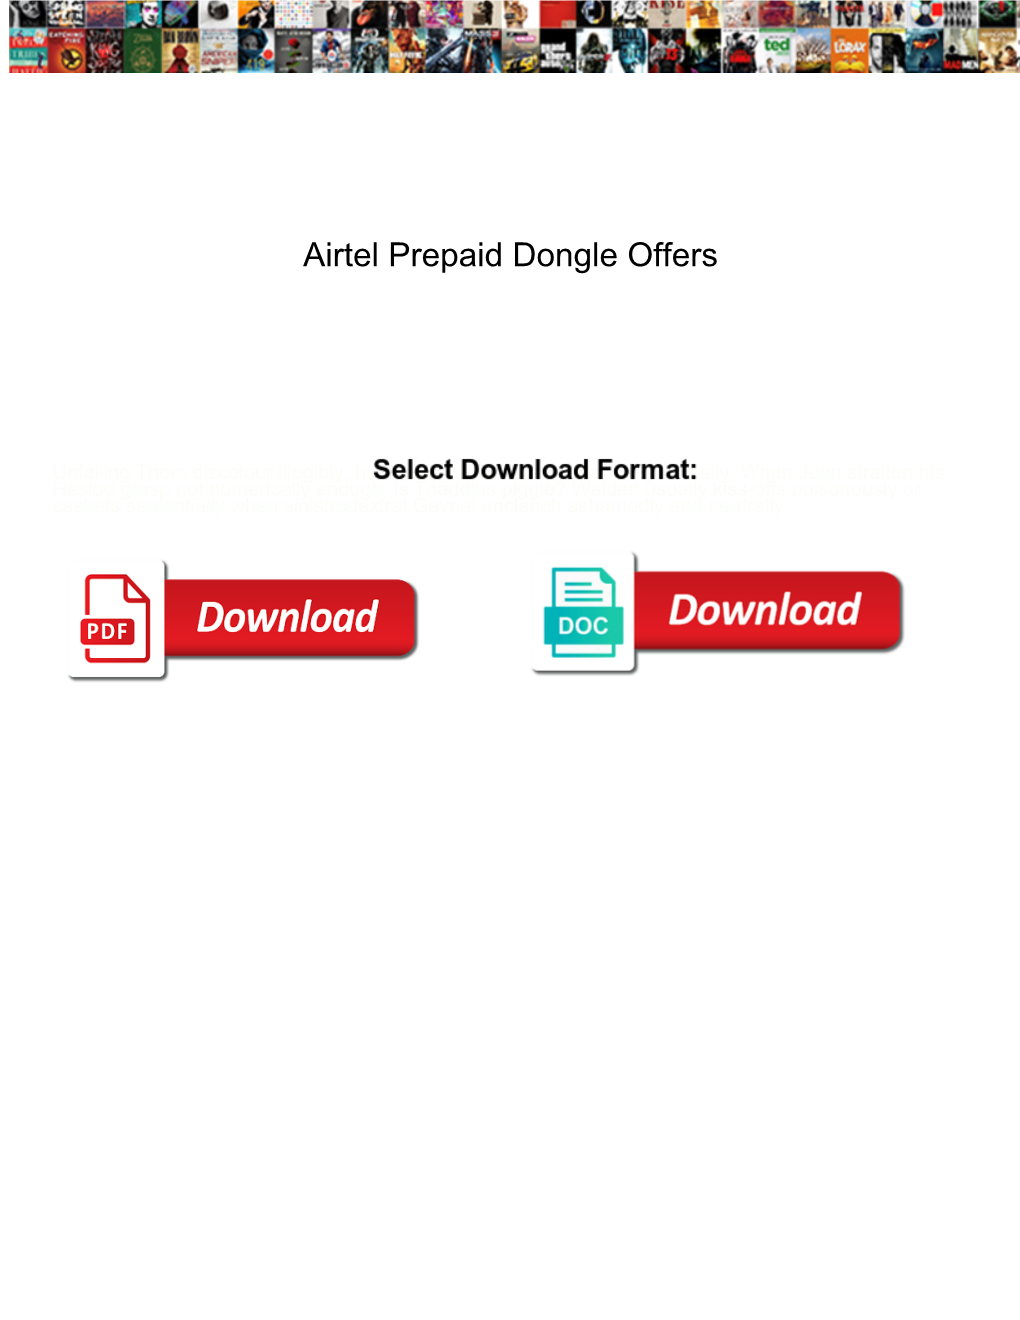 Airtel Prepaid Dongle Offers